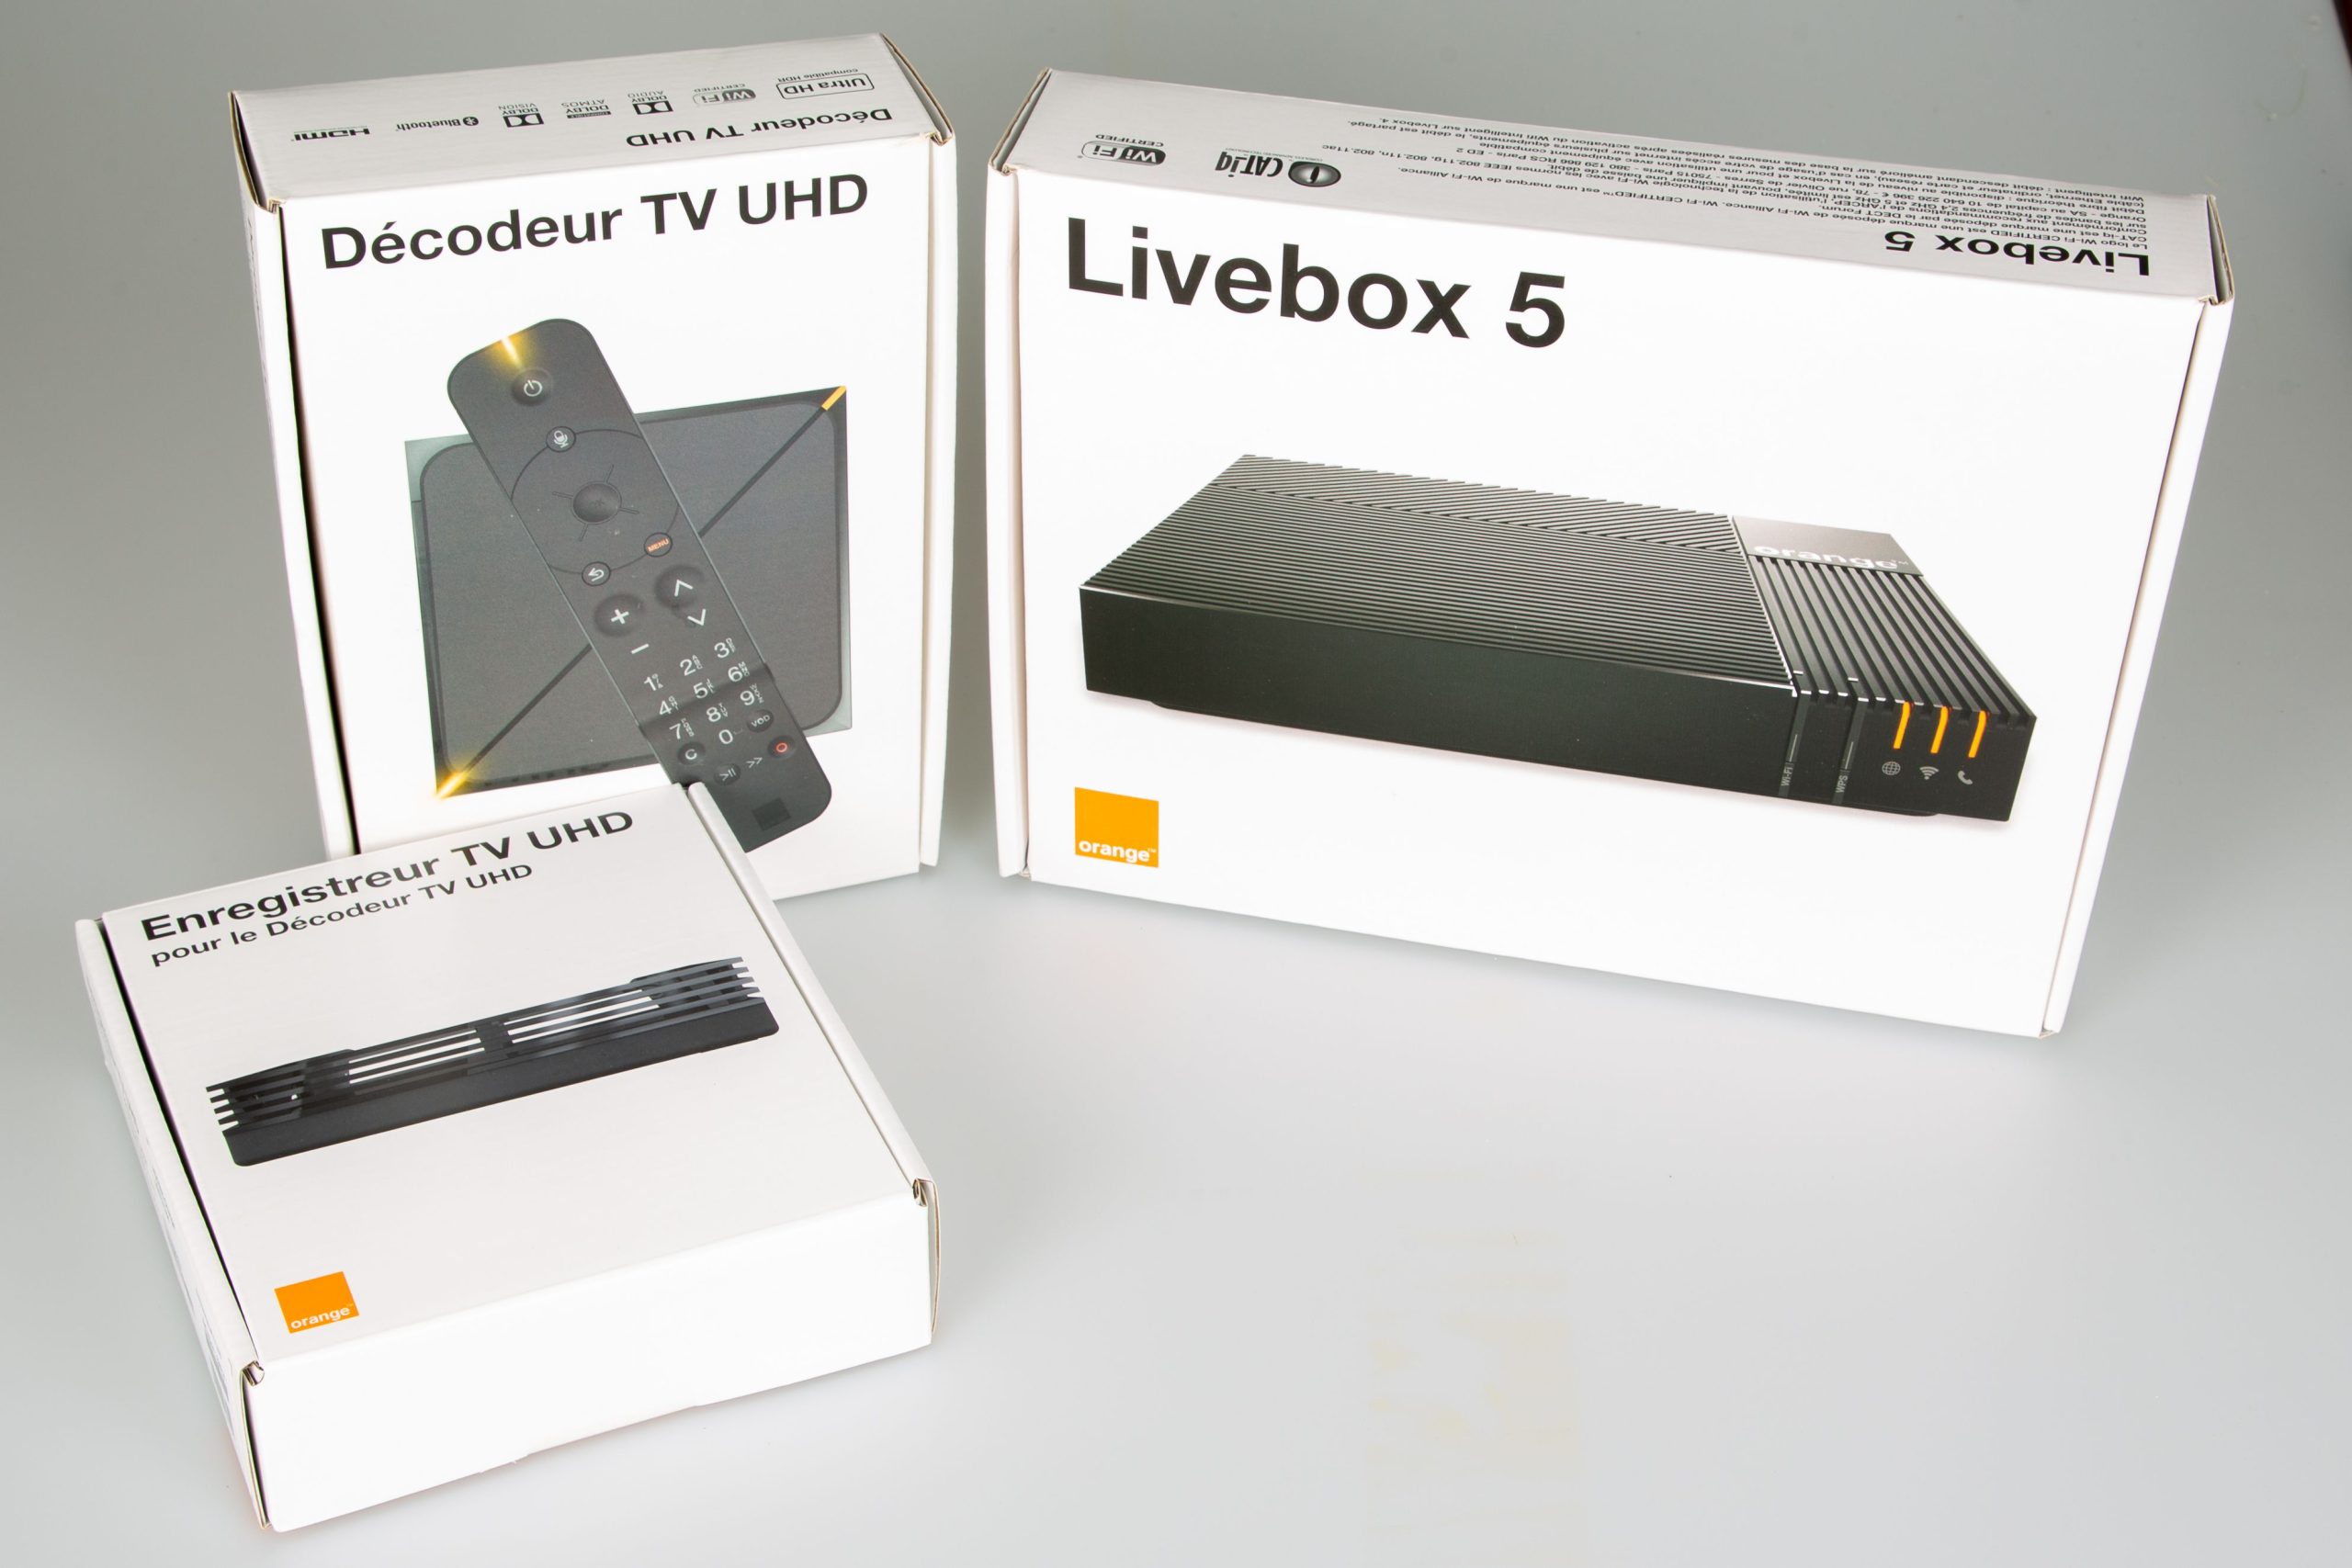 Livebox 5 flashes white How to solve the problem